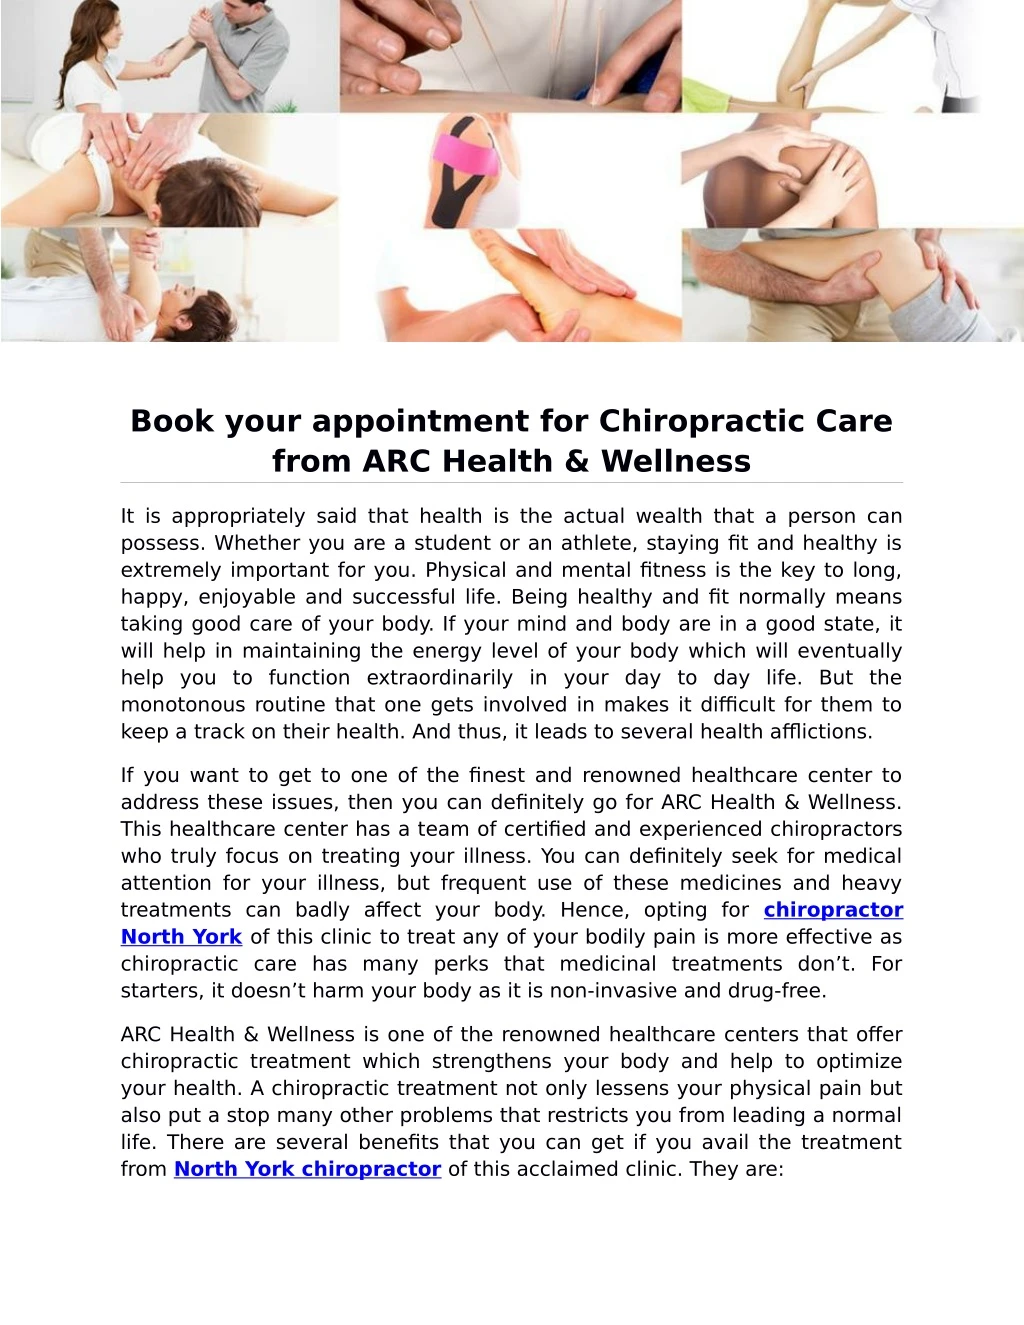 book your appointment for chiropractic care from